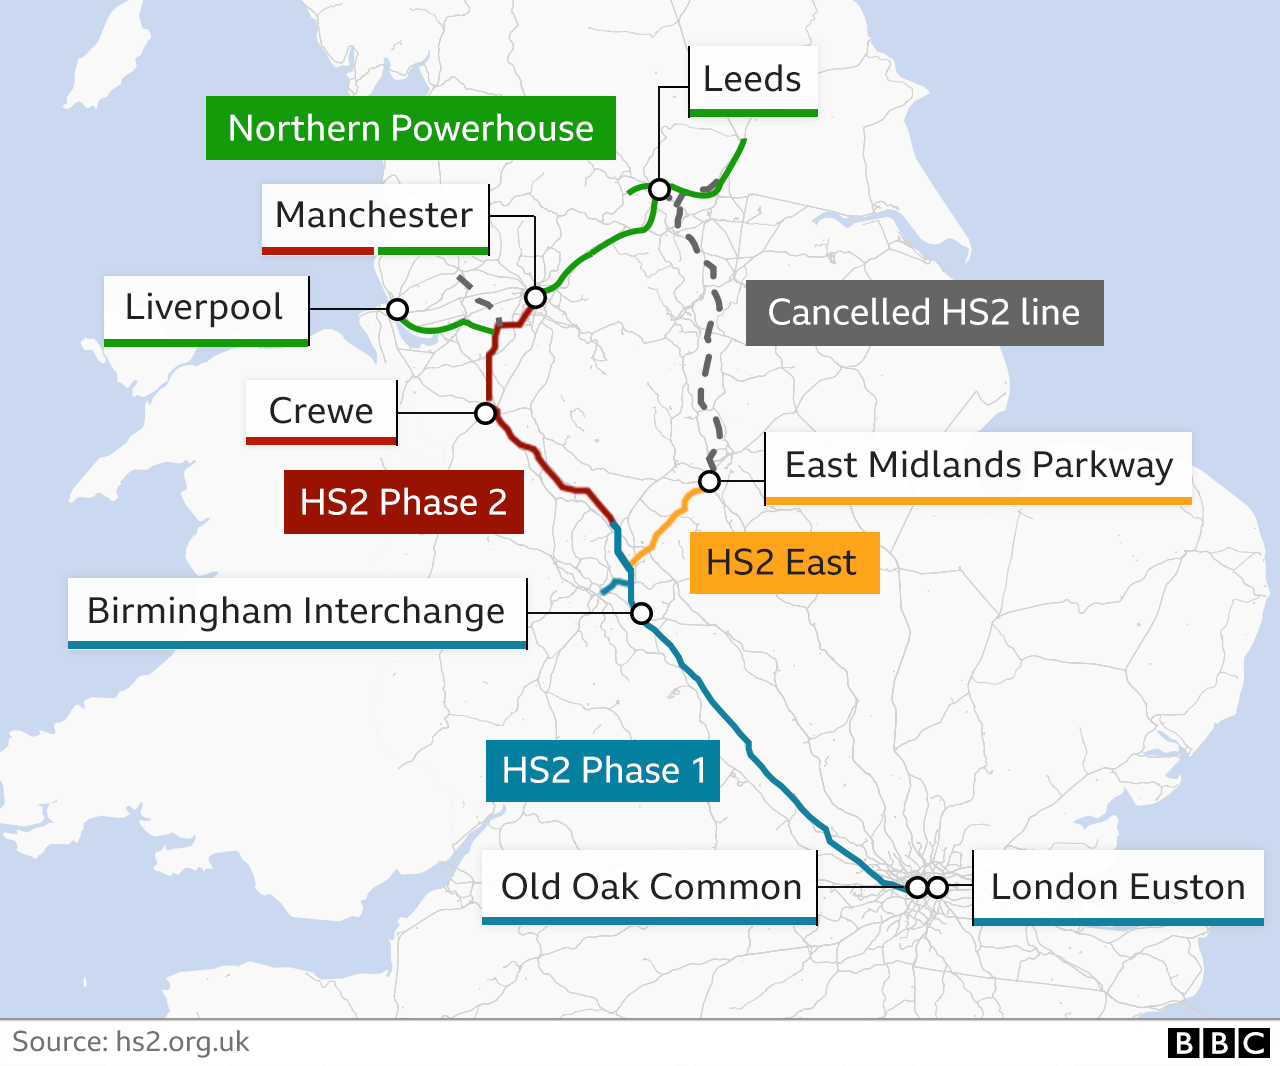 Map showing HS2 routes and phases as well as plans for Northern Powerhouse and Hs2 East lines